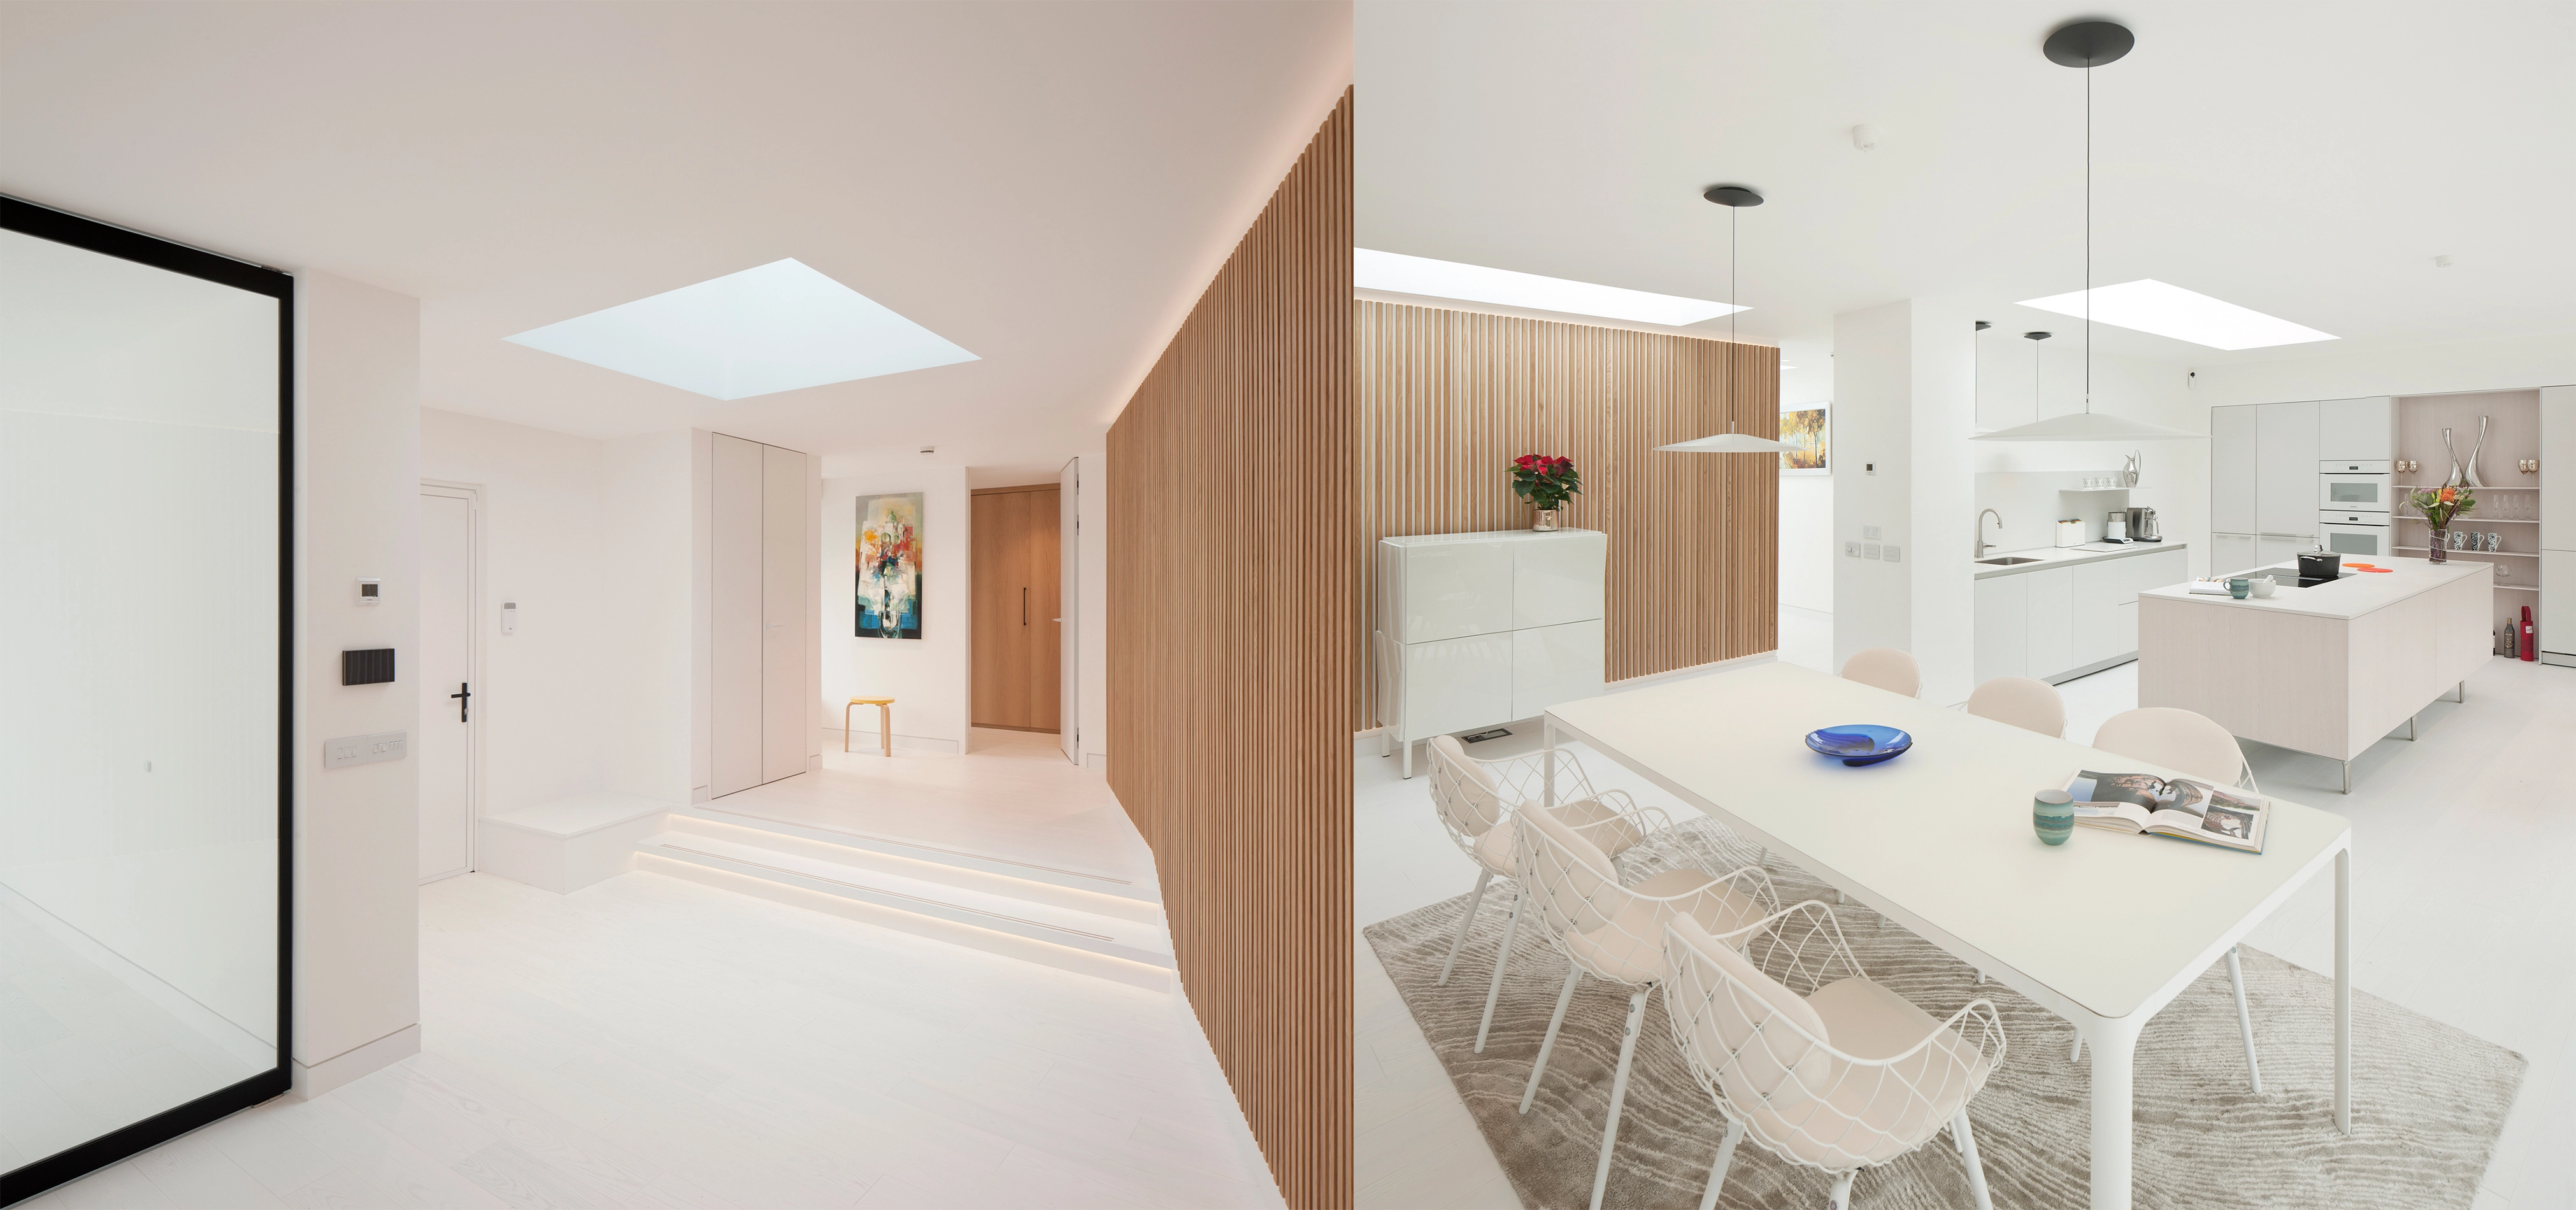 Two images of the modern luxurious interior of a recently renovated house in Glasgow, with white walls and white hardwood floors, timbe panel cladded internal sauna, LEDs placed strategically to create floating effect on walls and the three steps in the entryway, and rooflights spread throughput. 